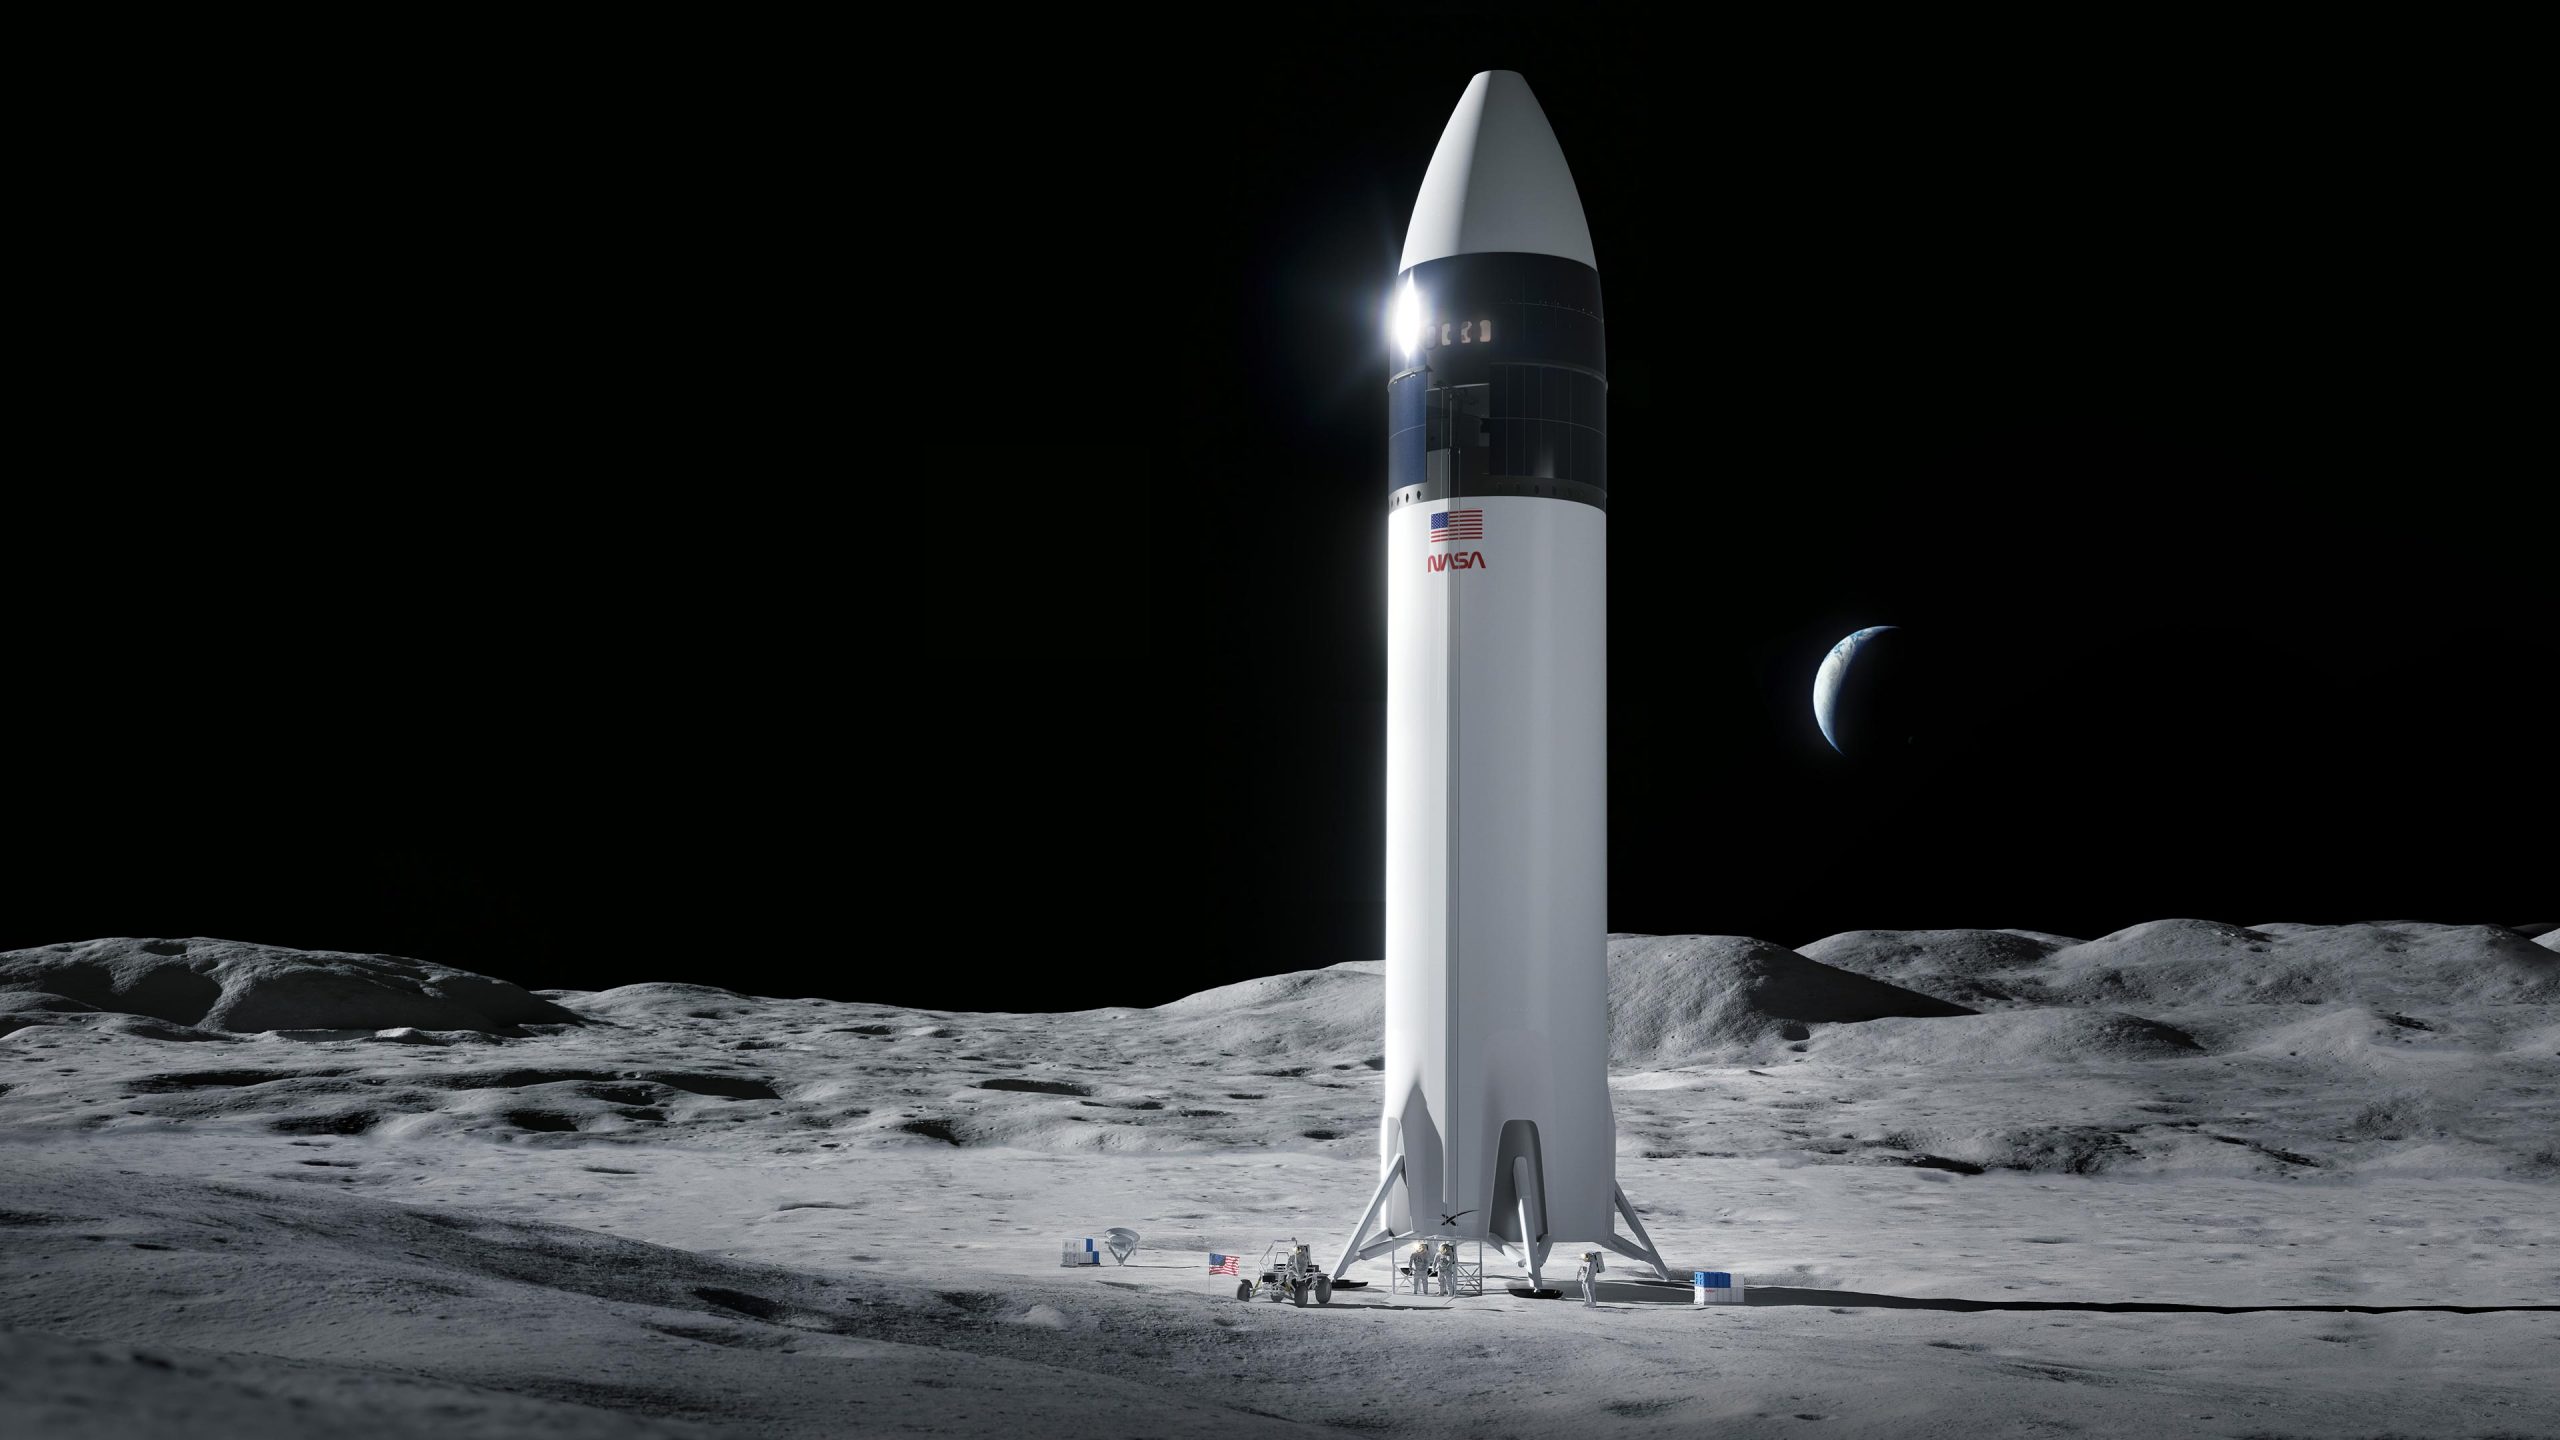 NASA selects SpaceX Starship to land next Americans on moon